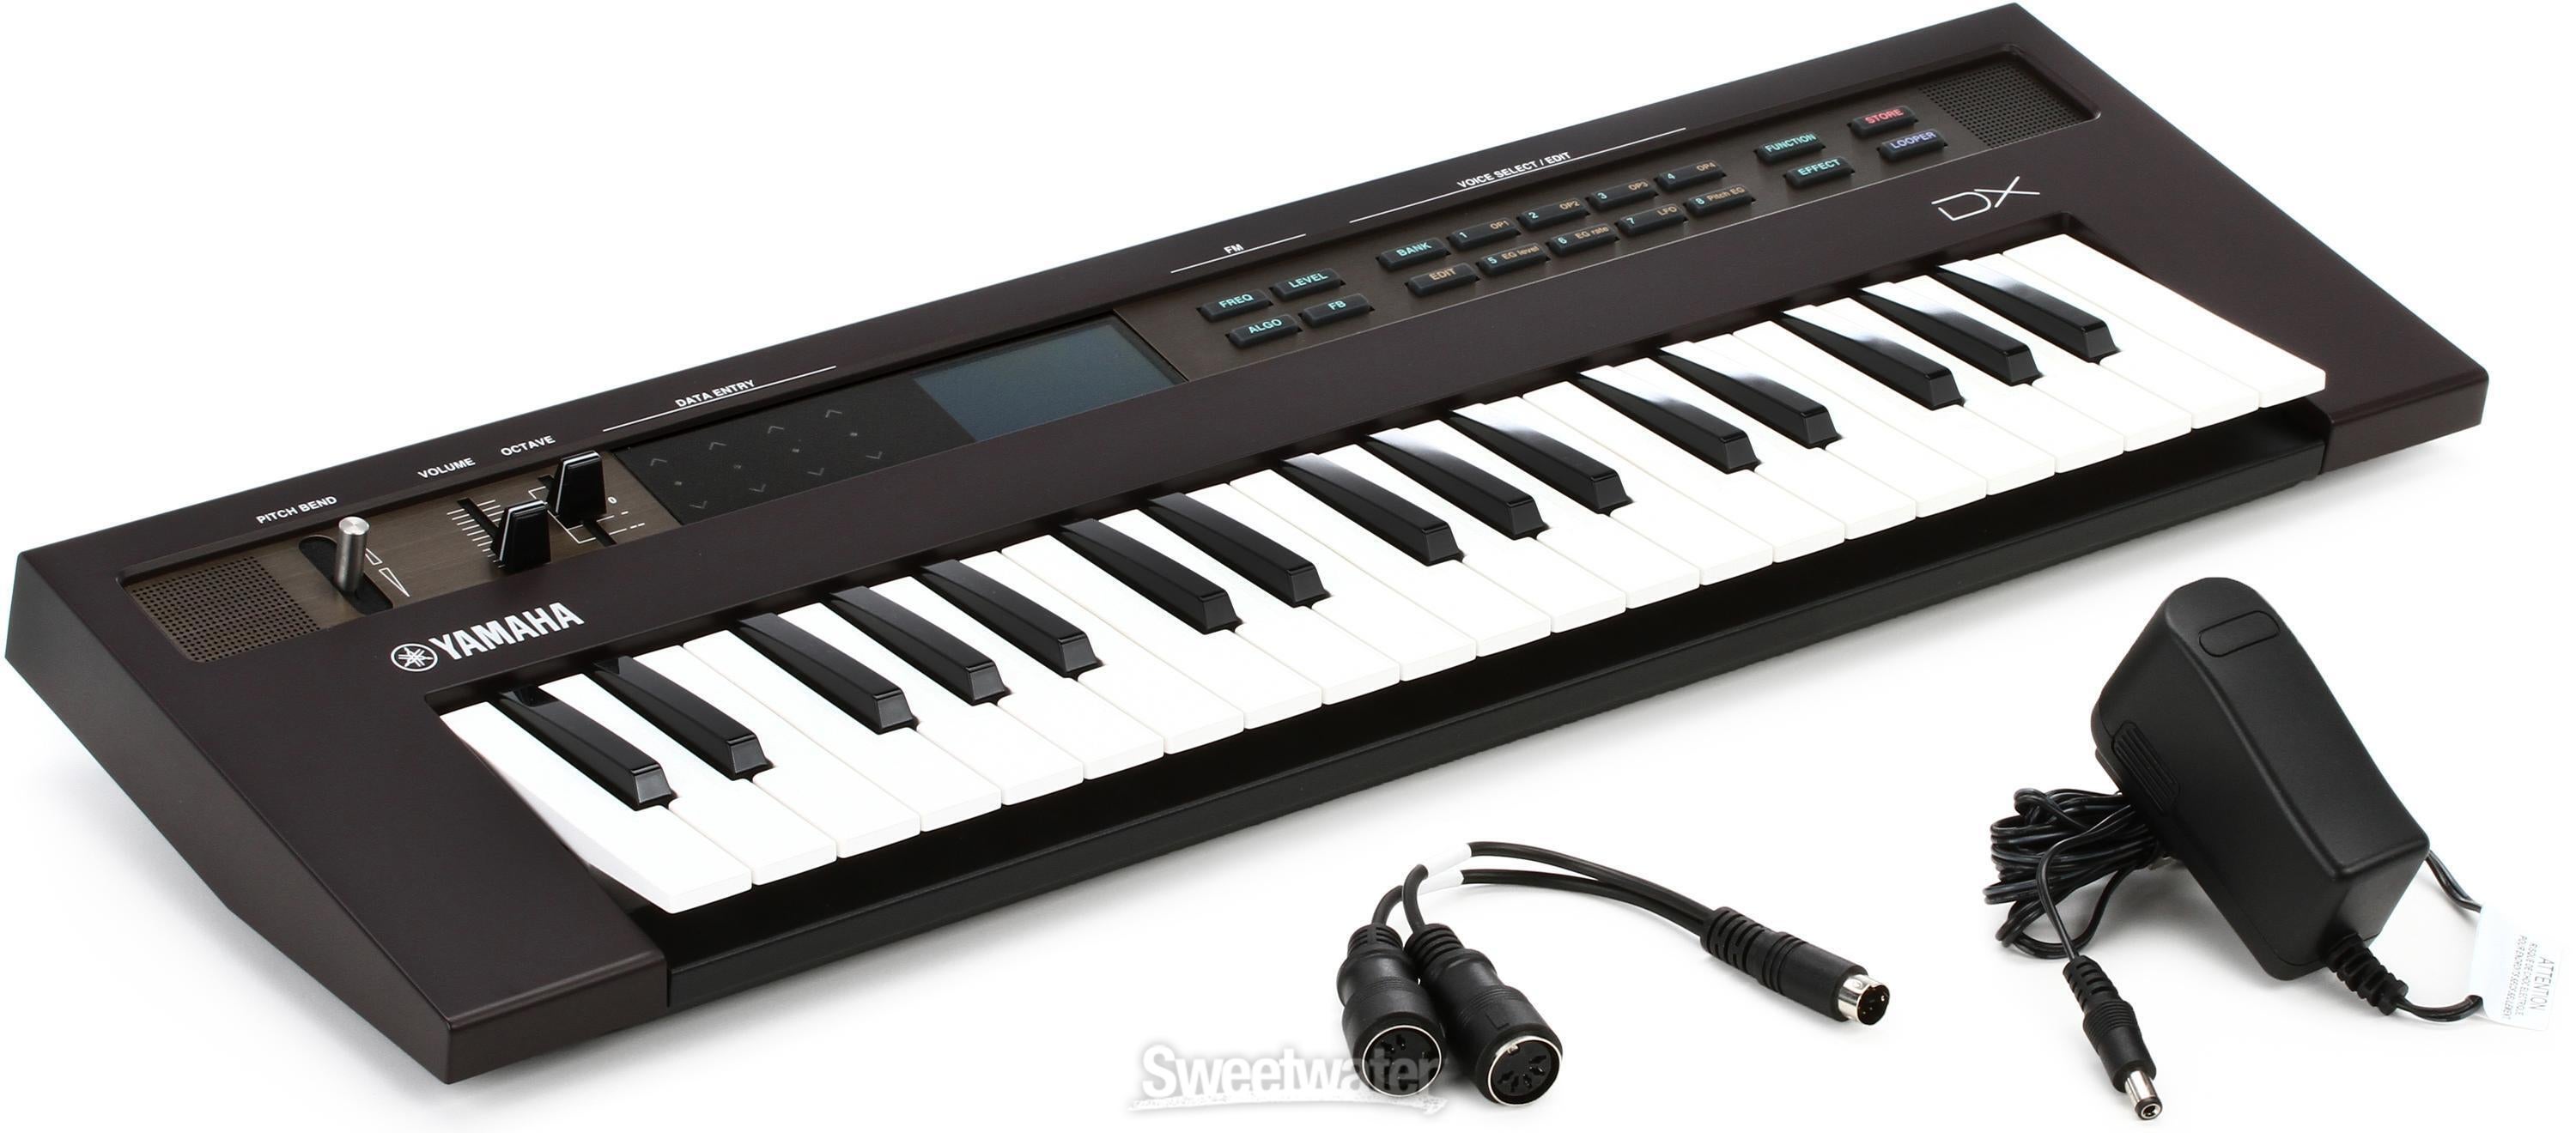 Yamaha Reface DX FM Synthesizer | Sweetwater